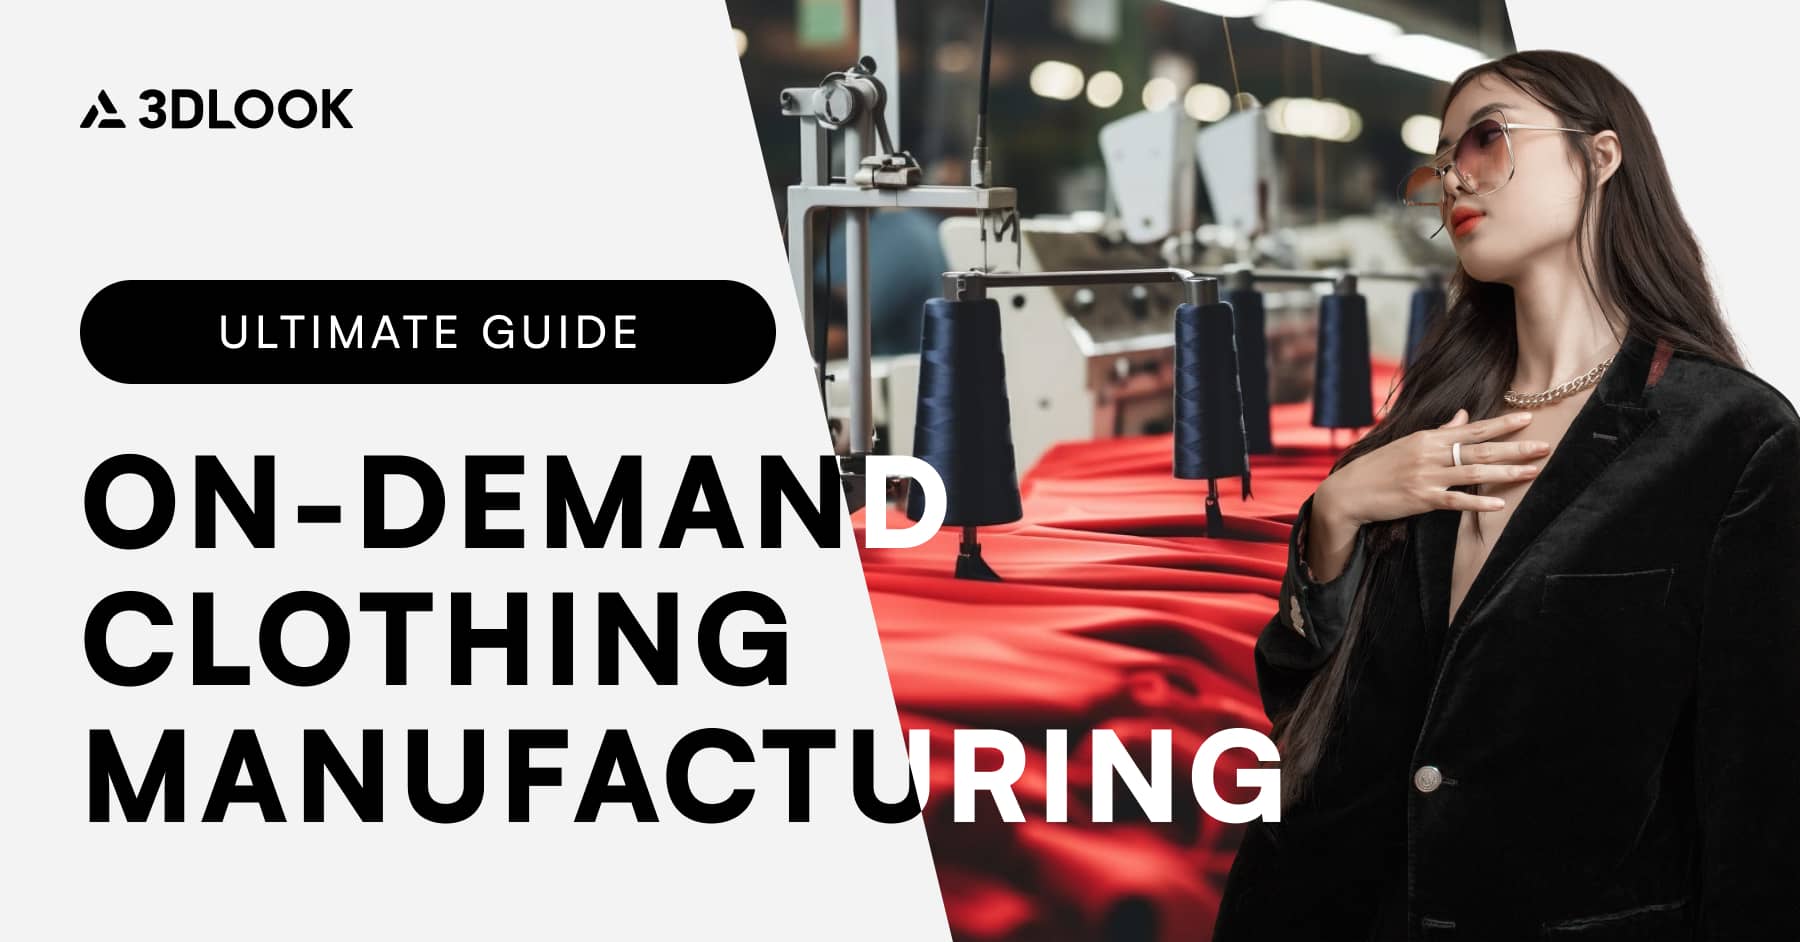 Promotional image for a guide on how on-demand clothing manufacturing benefits fashion brands, featuring a woman in sunglasses and a coat alongside visuals of a textile factory.